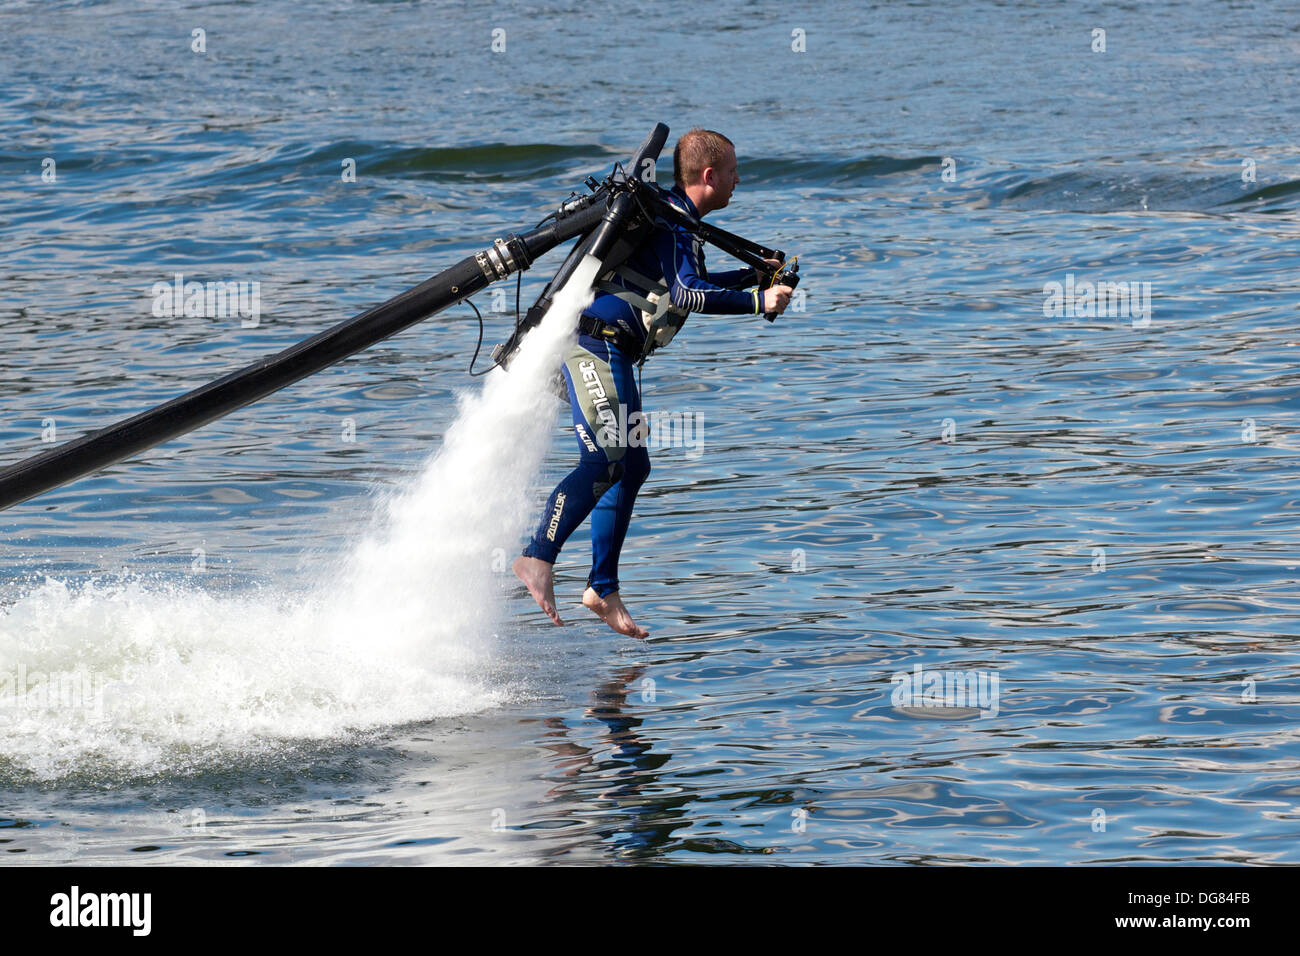 Man piloting a water powered jet pack (Jet Lev) at high speed Royal Victoria Dock London England Europe Stock Photo